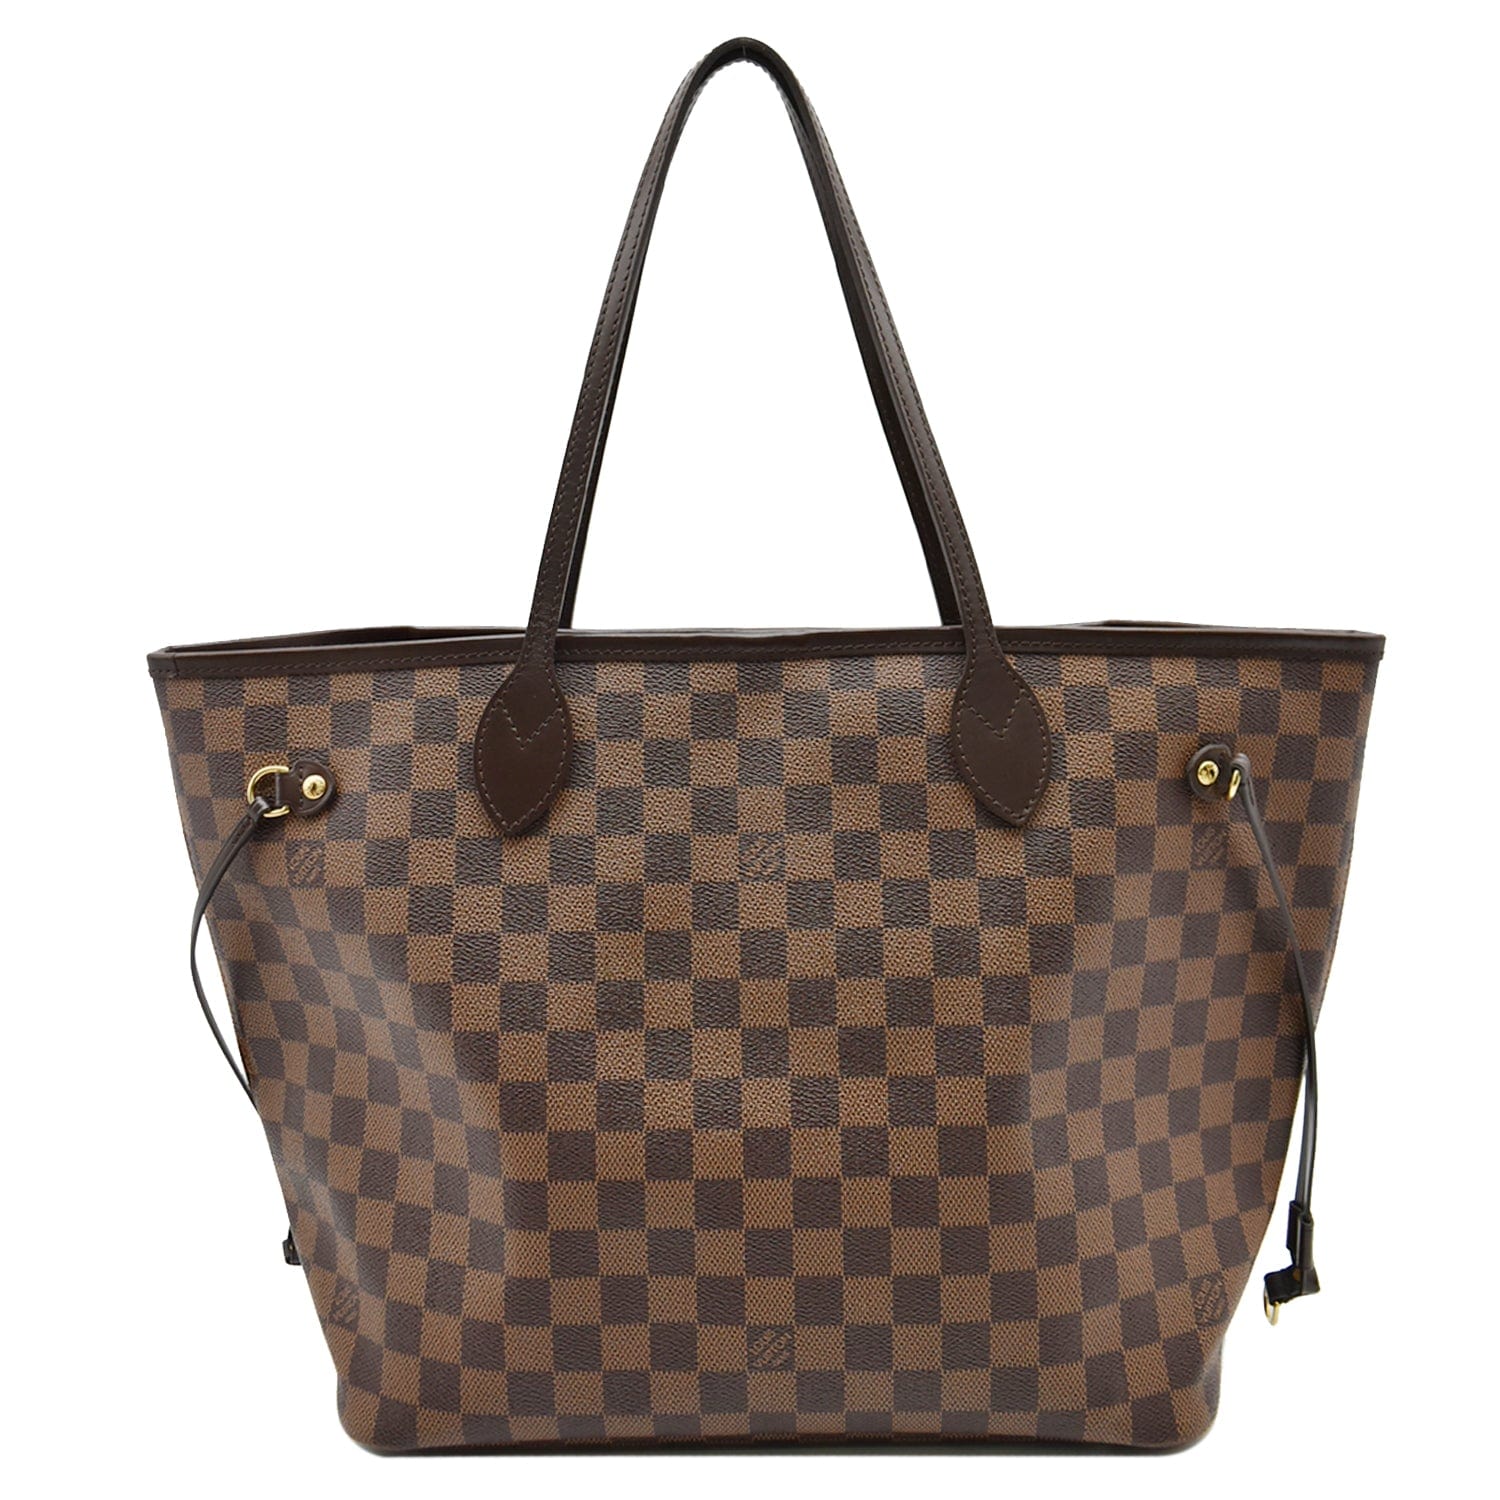 Authentic 2017 Louis Vuitton Neverfull MM Tote Bag in Damier Ebene EUC